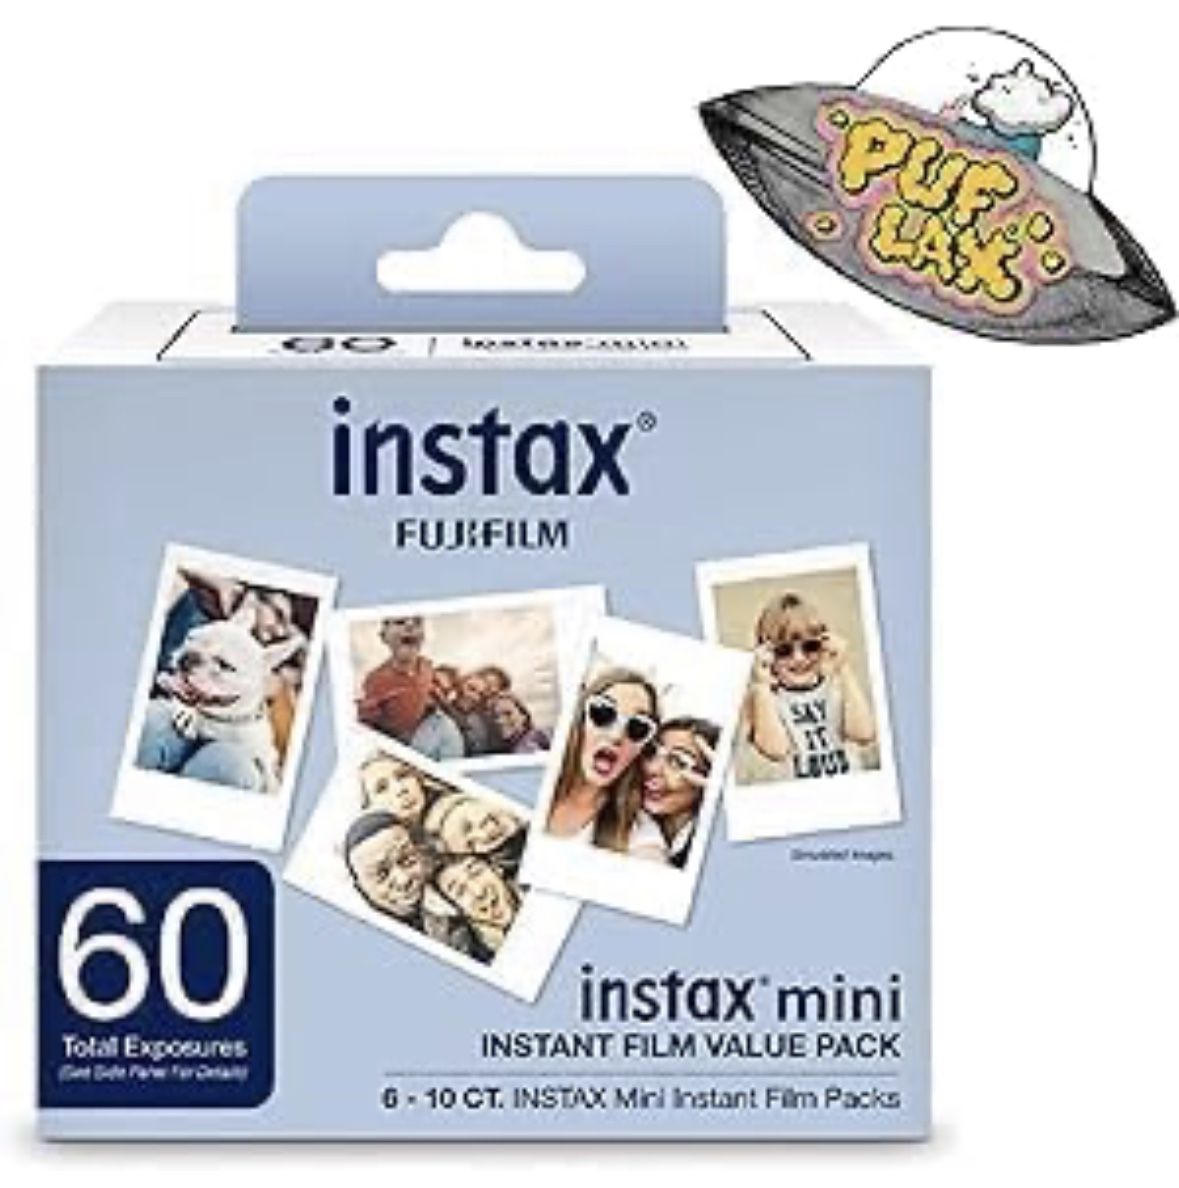 FUJIFILM Mini Instant Camera Film: 60 Shoots Total, Value Pack, (10 Sheets x 6) - Capture Memories Anytime, Anywhere - Includes Puflax UFO Sticker